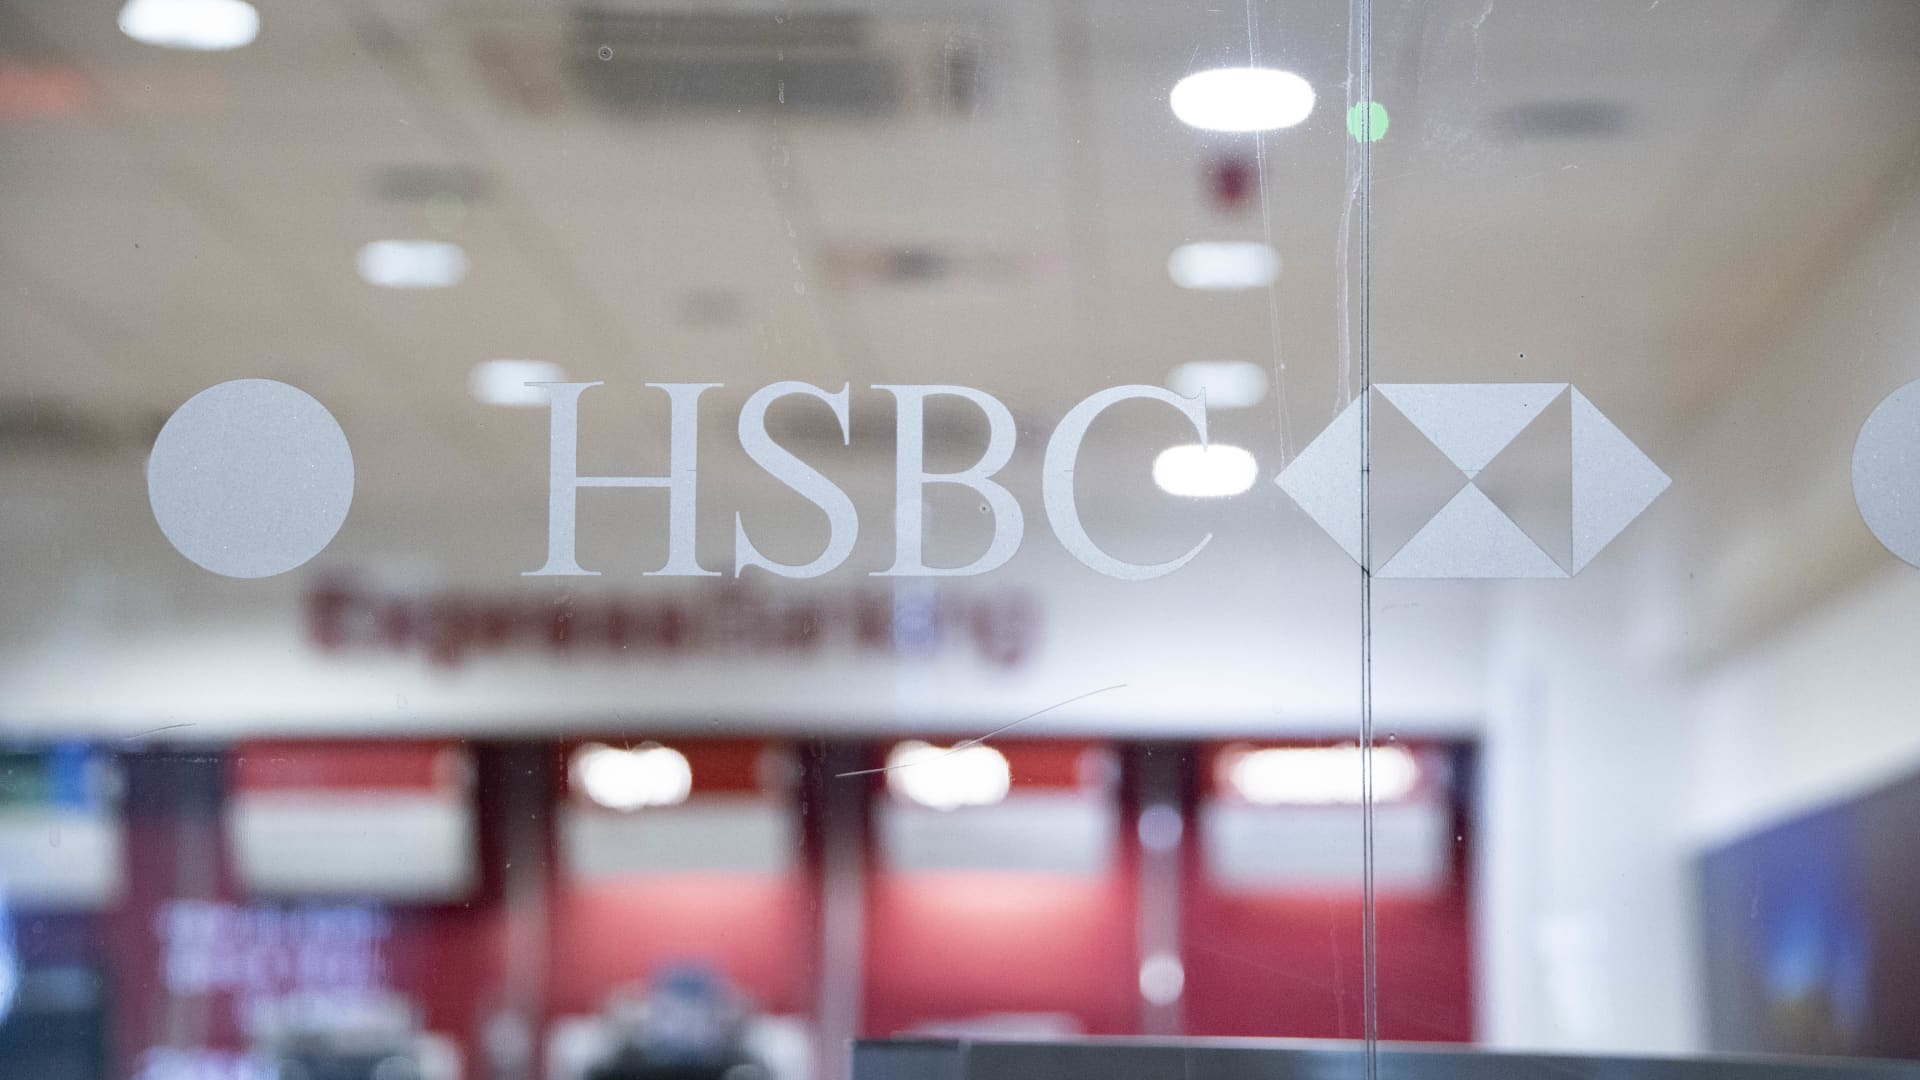 HSBC is the largest bank in Europe by total assets.